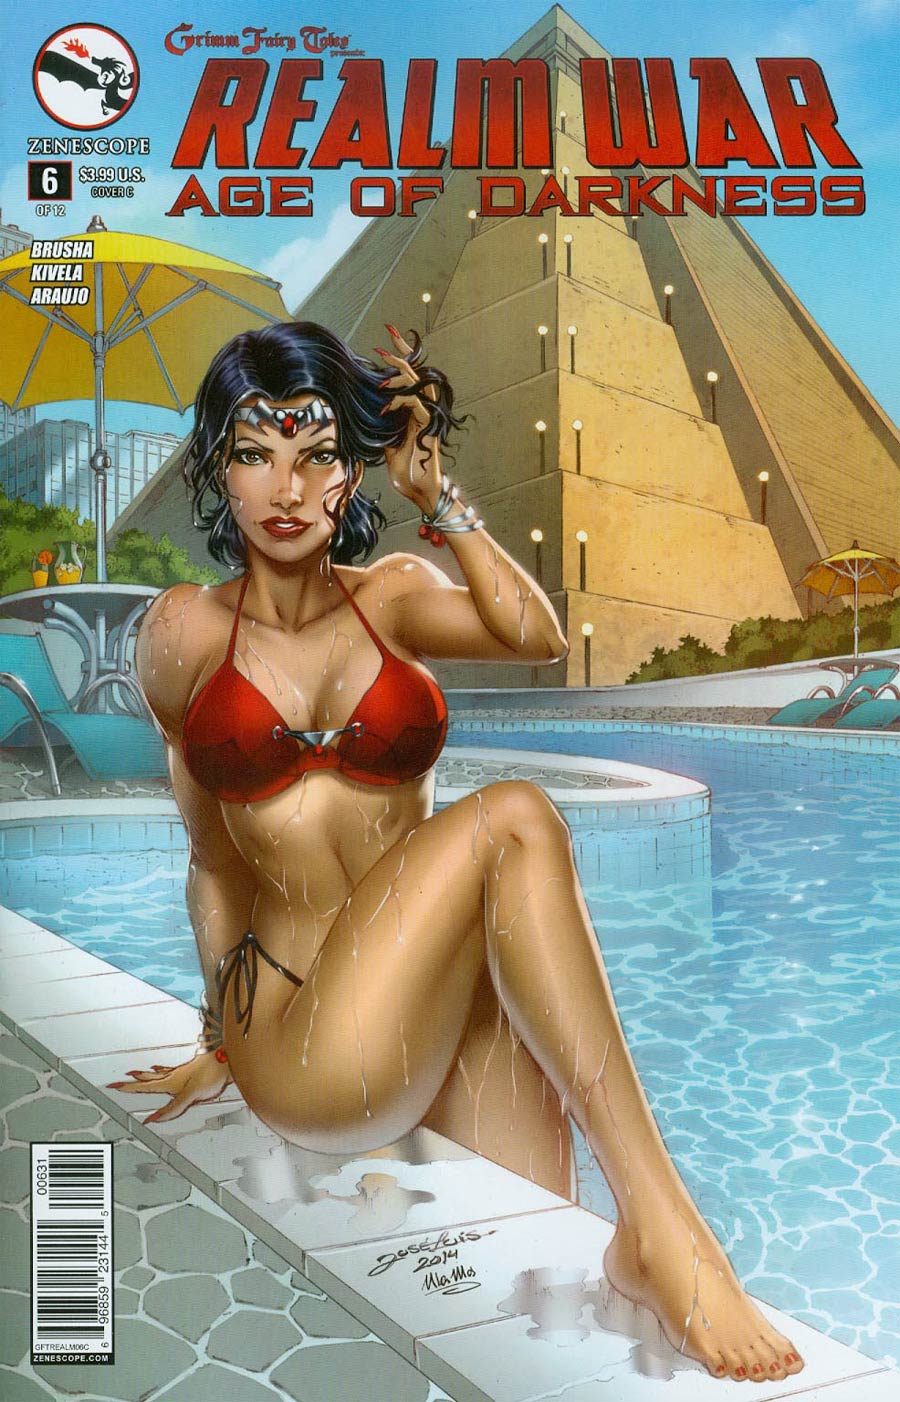 Grimm Fairy Tales Presents Realm War #6 Cover C Jose Luis (Age Of Darkness Tie-In)